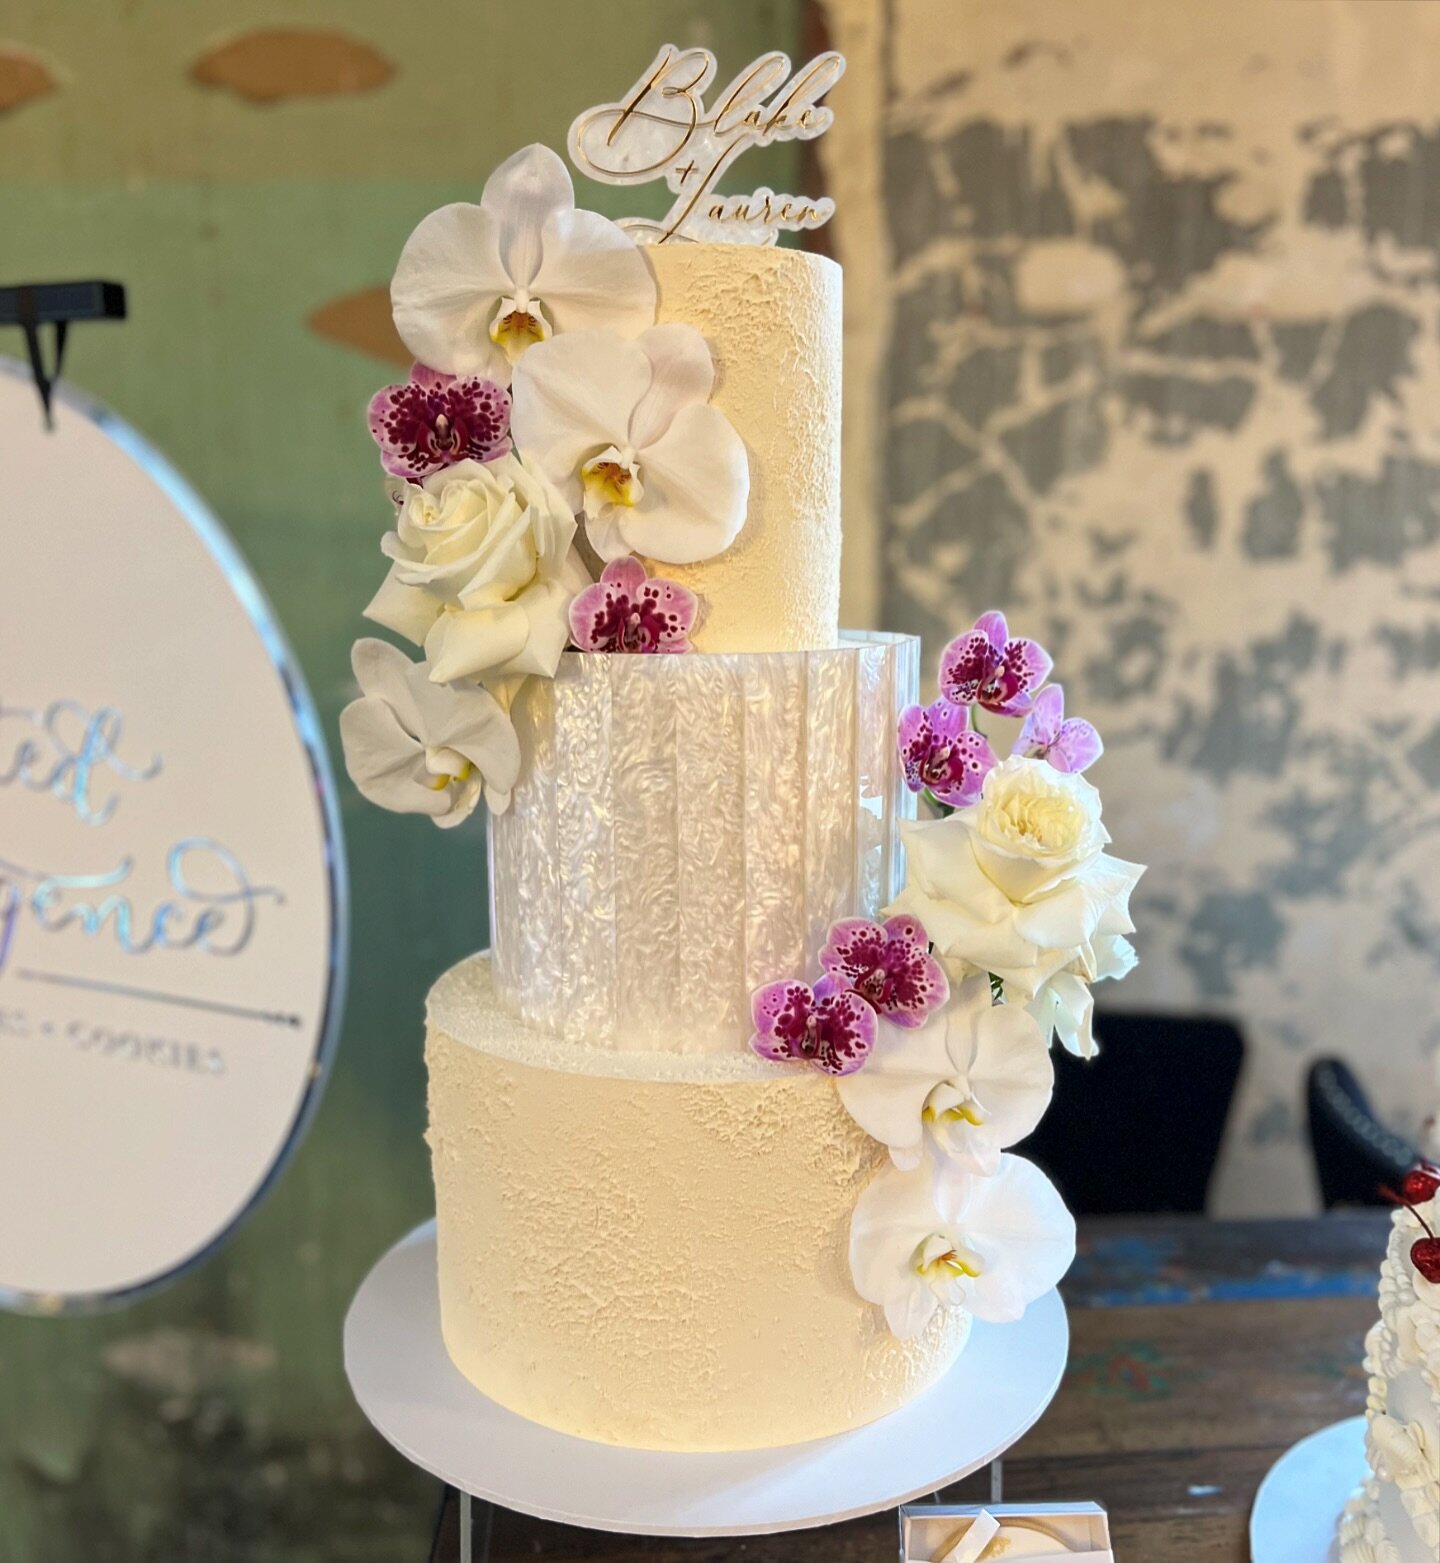 I&rsquo;m still dreaming about the combo of the orchids and the acrylic details on this one! 
.
Toppers @kctimesco 
#frostedindulgence #brisbanecakes #brisbaneweddingcakes #weddingcake #weddingcakeideas #weddingcakeinspo #freshflowercake #orchidweddi